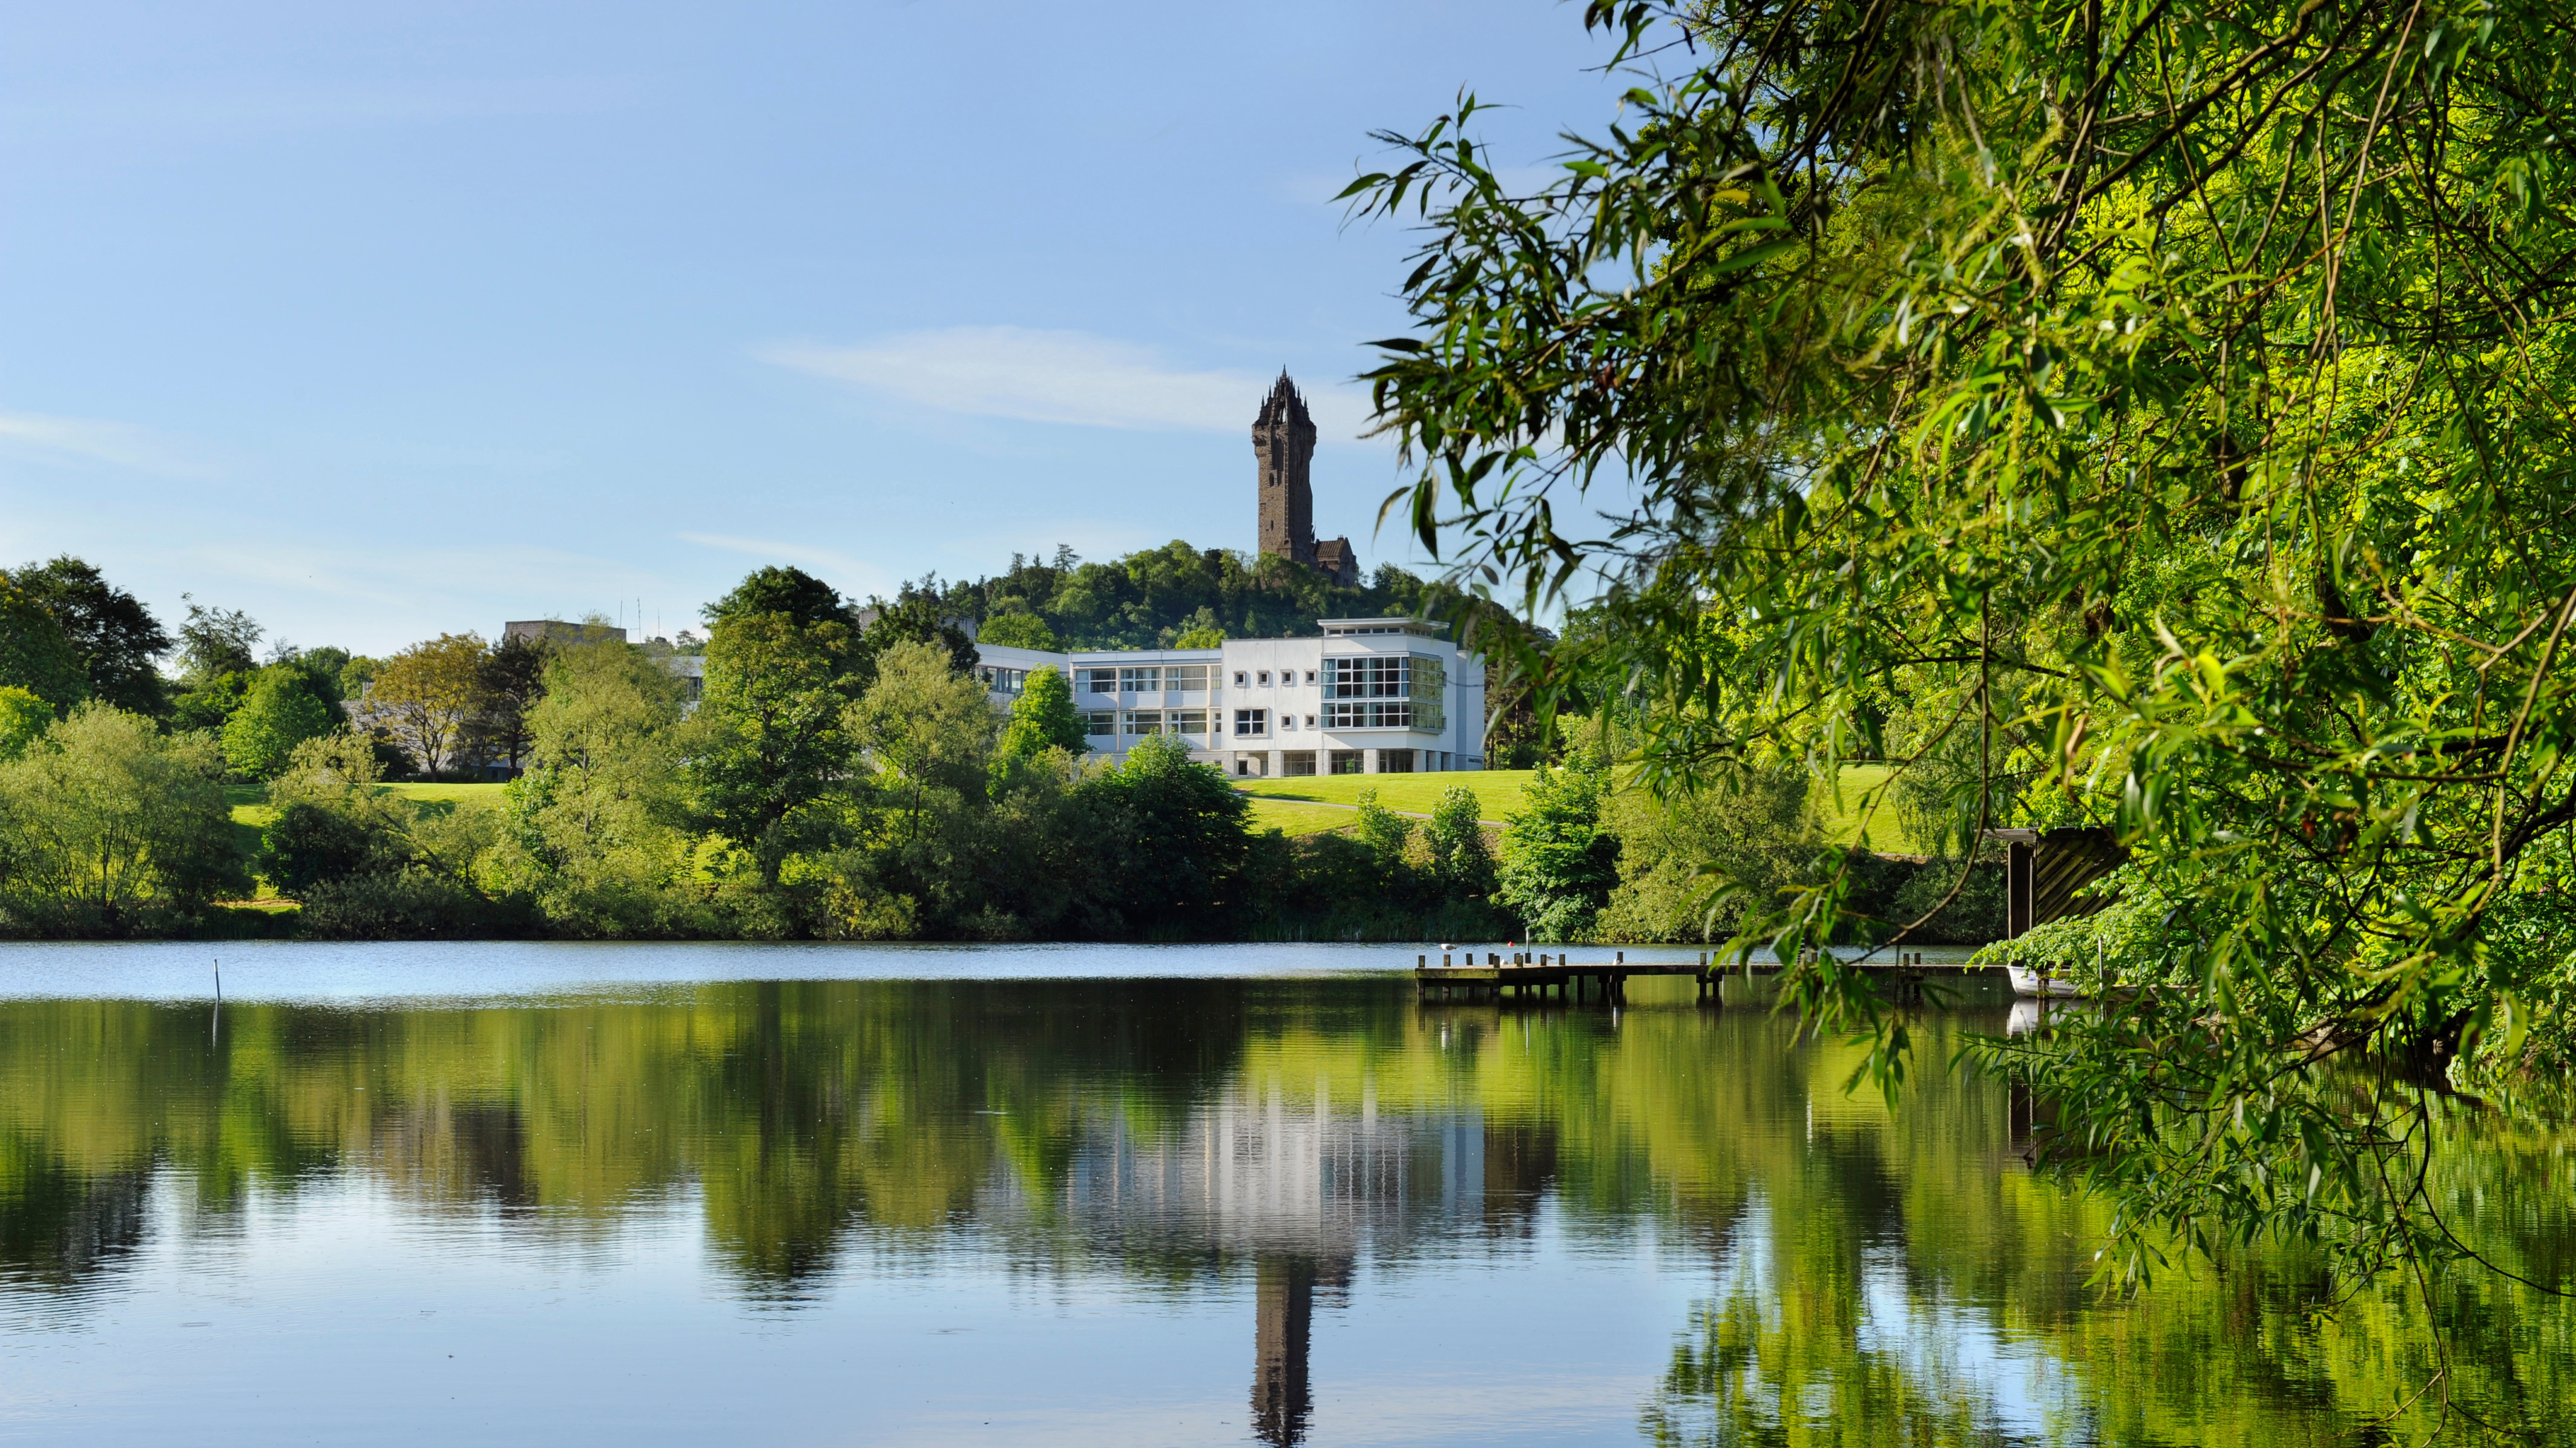 University of Stirling lake and castle